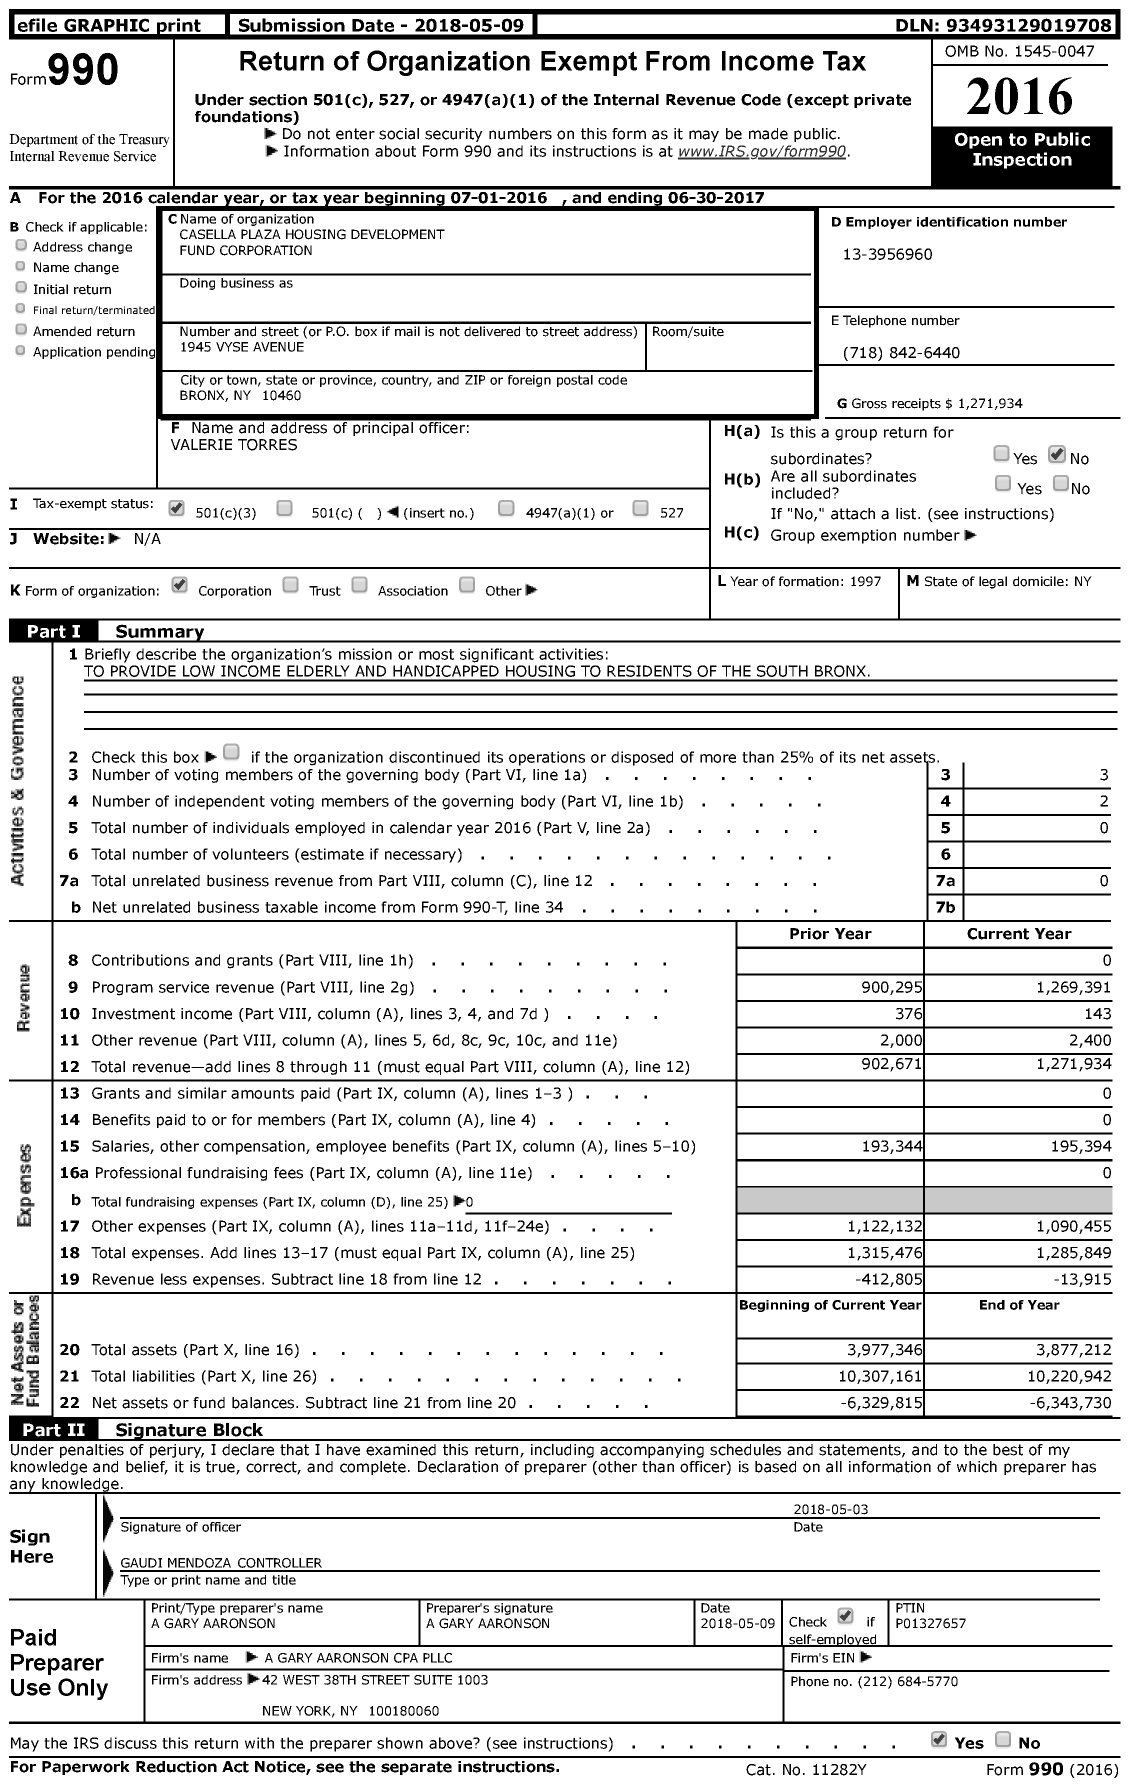 Image of first page of 2016 Form 990 for Casella Plaza Housing Development Fund Corporation